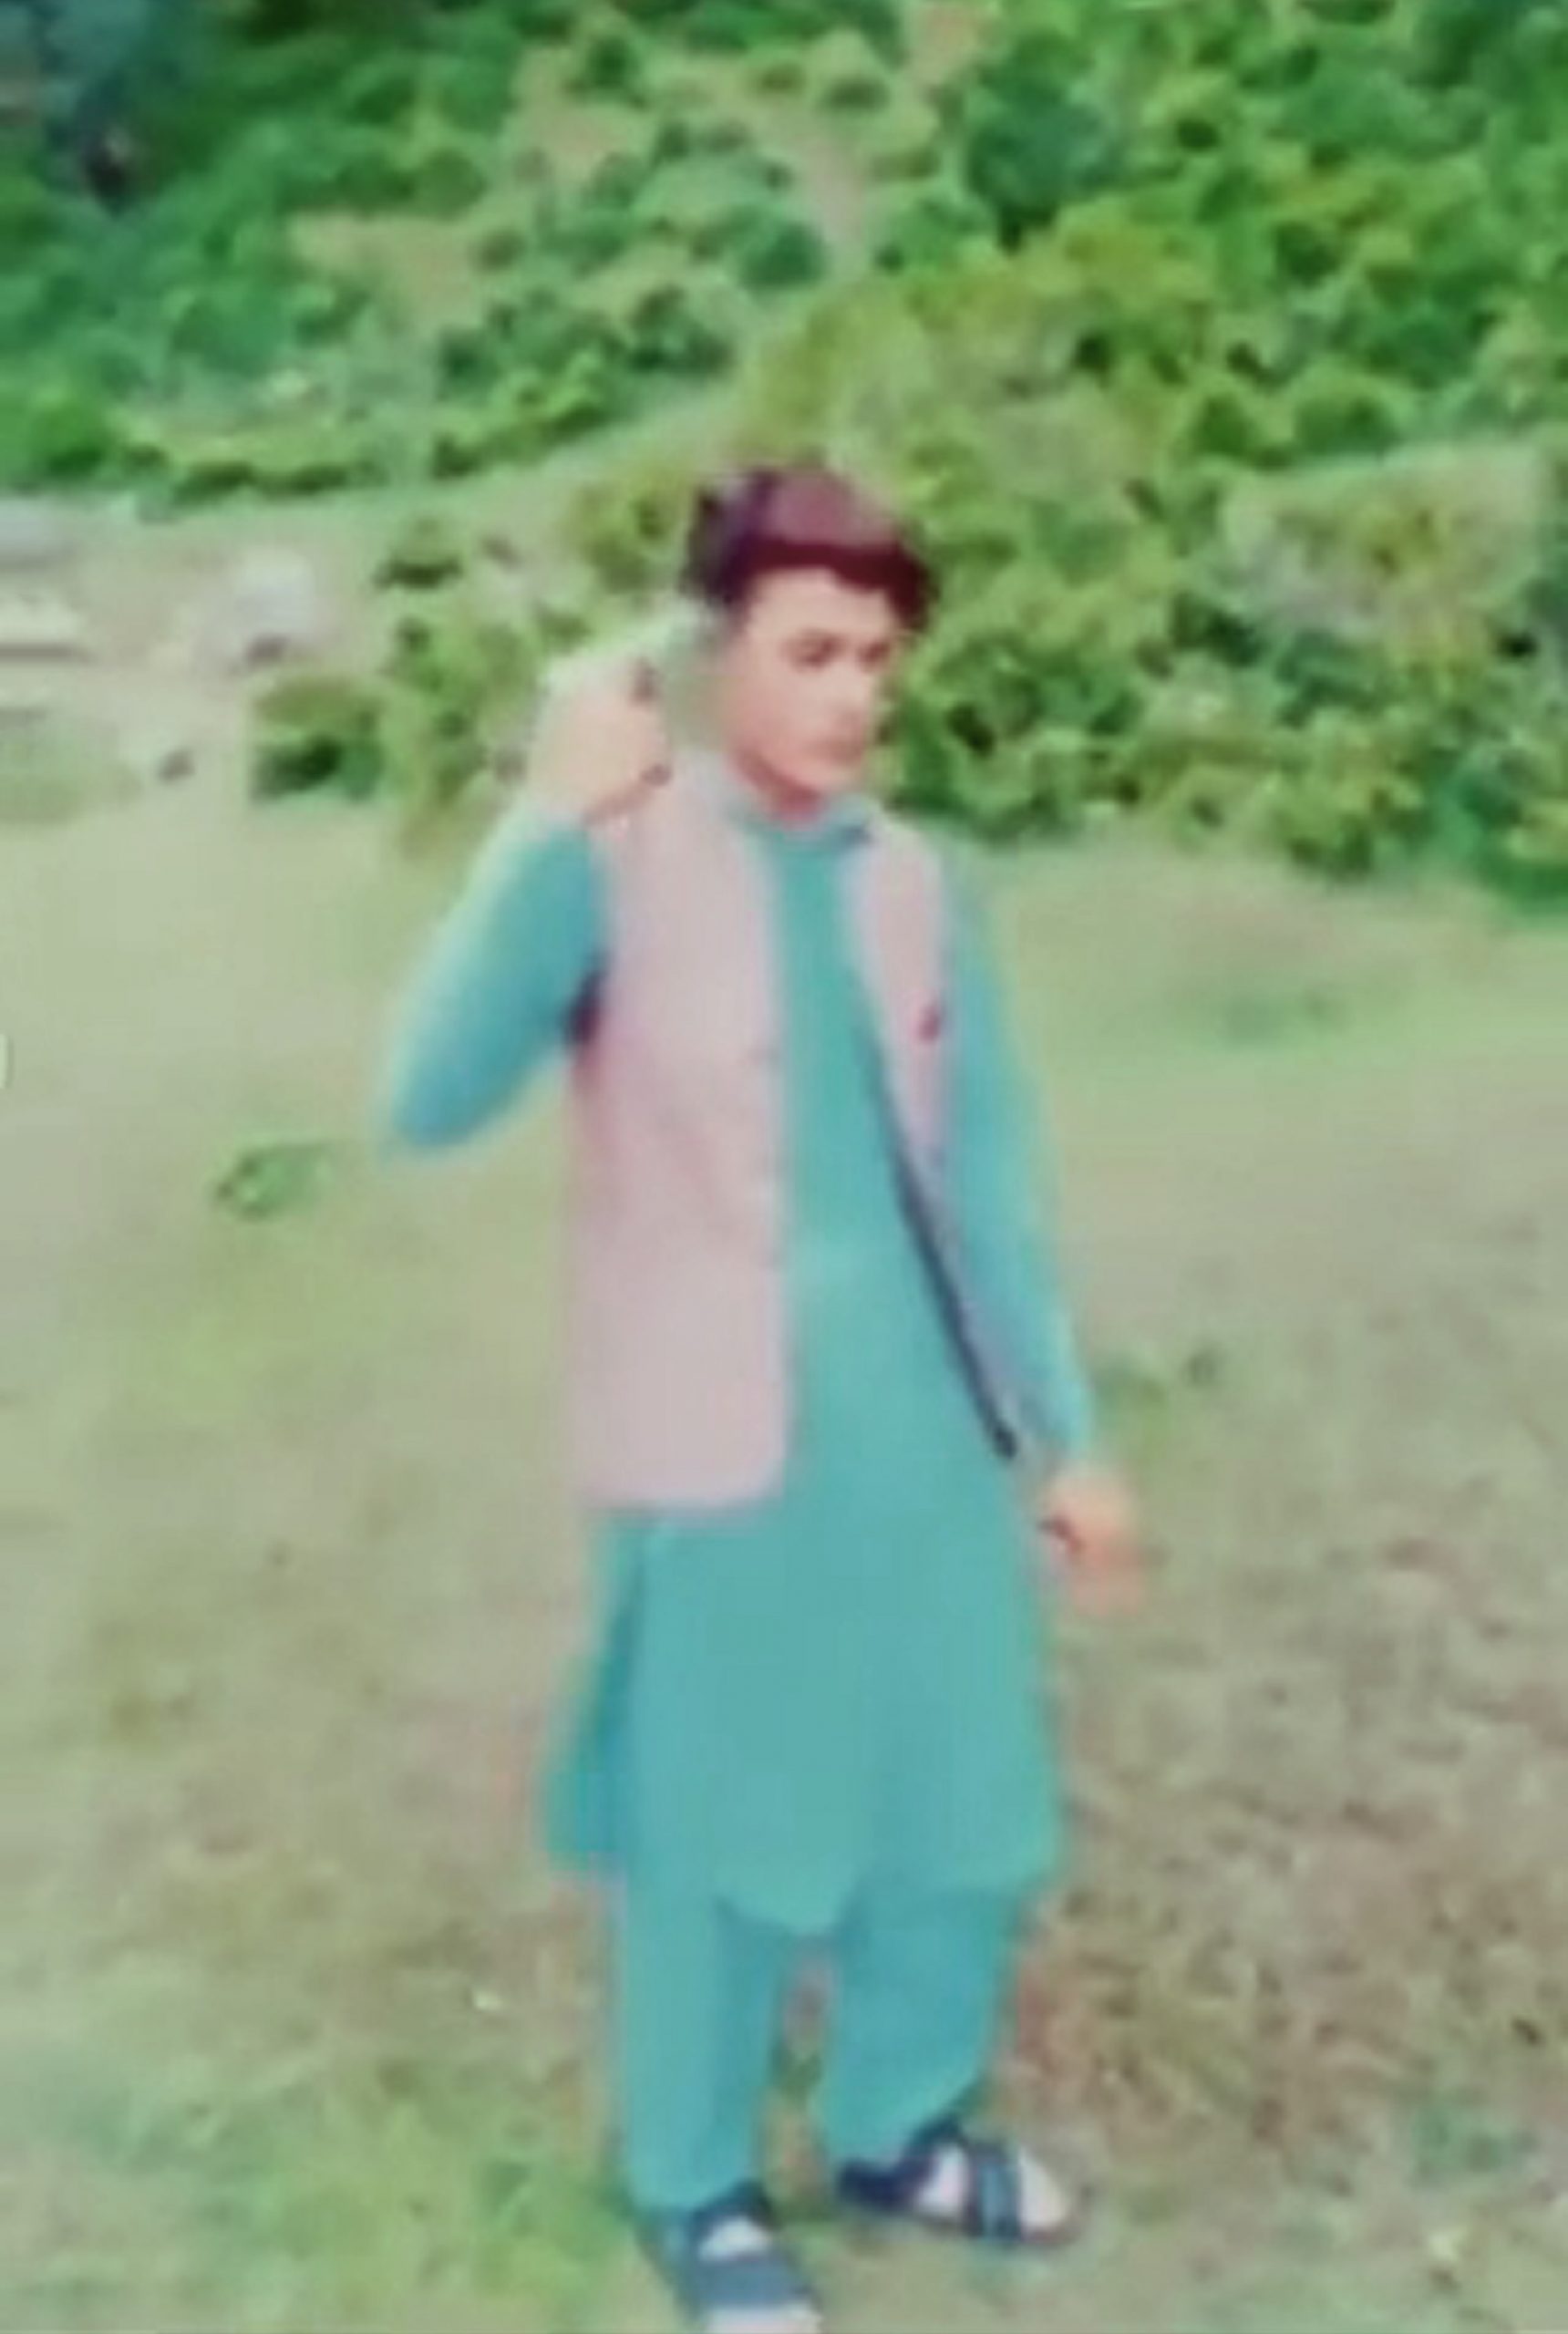 Read more about the article Pakistani Influencer Accidentally Shoots Himself While Filming Fake Suicide TikTok Clip